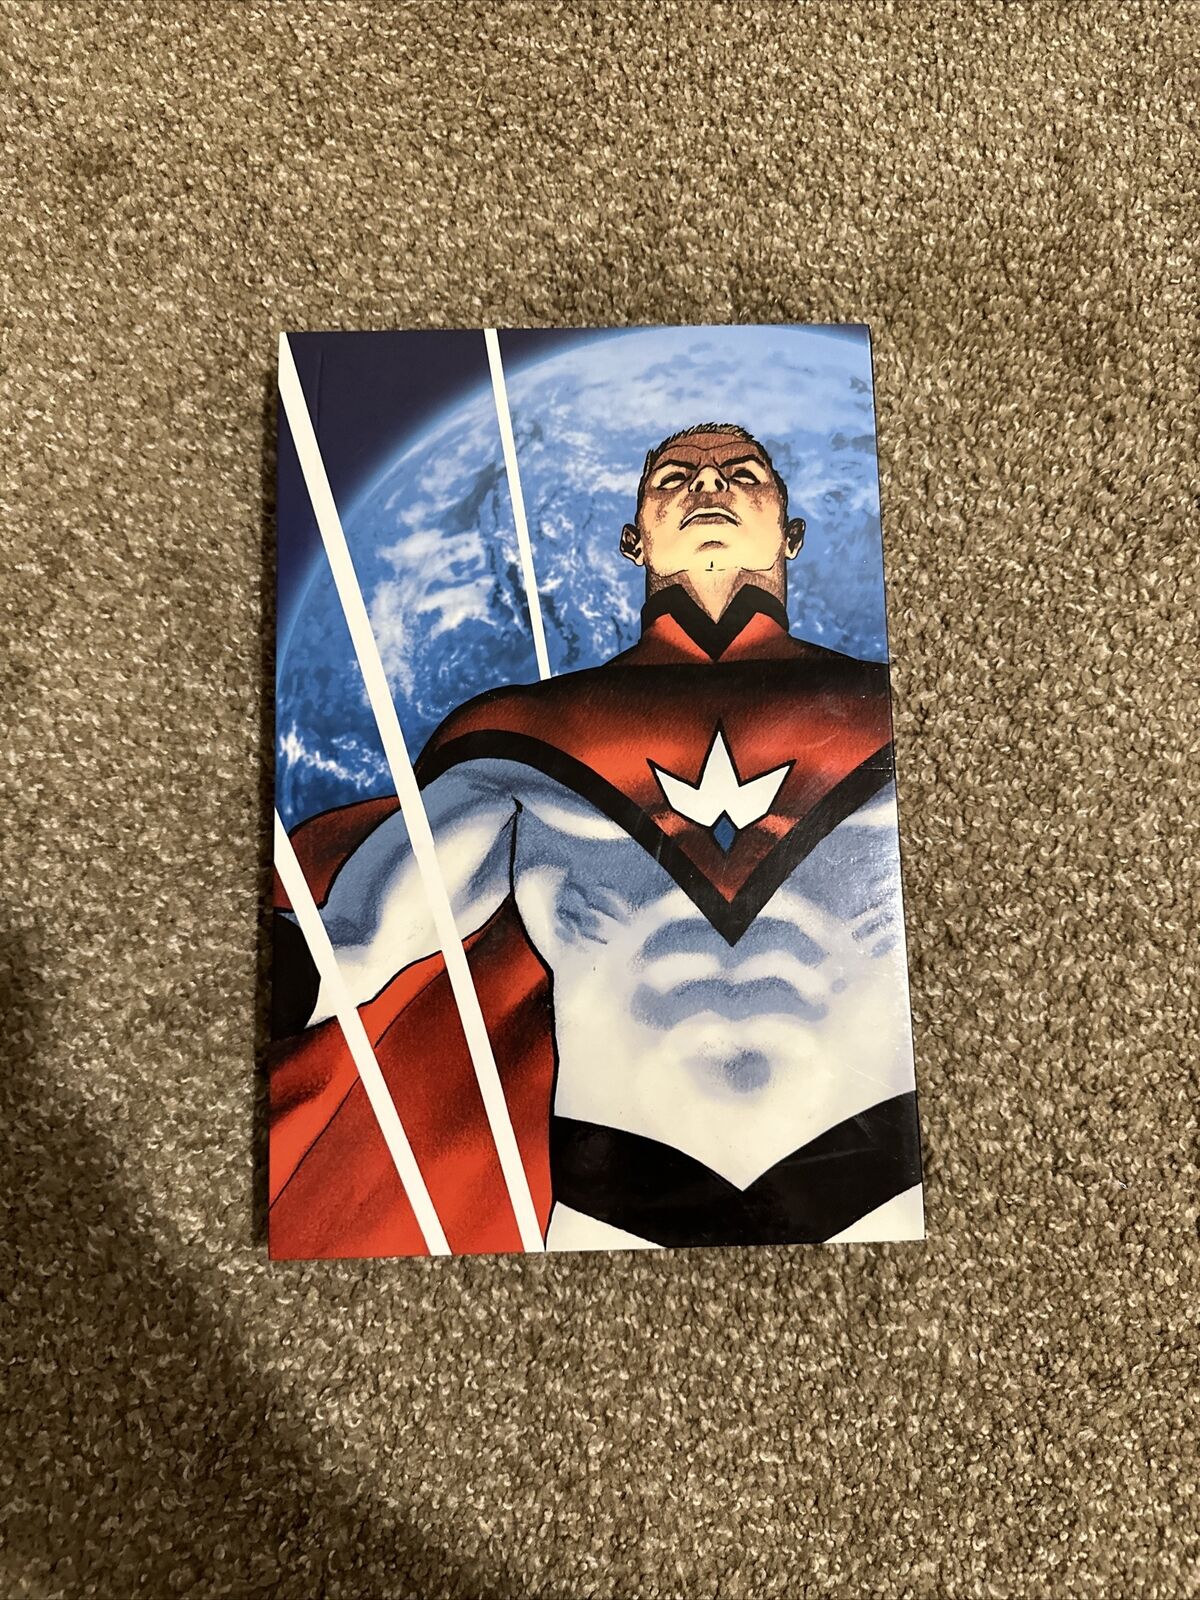 THE DEFINITIVE IRREDEEMABLE VOL. 1 By Mark Waid - HC w/ slip cover